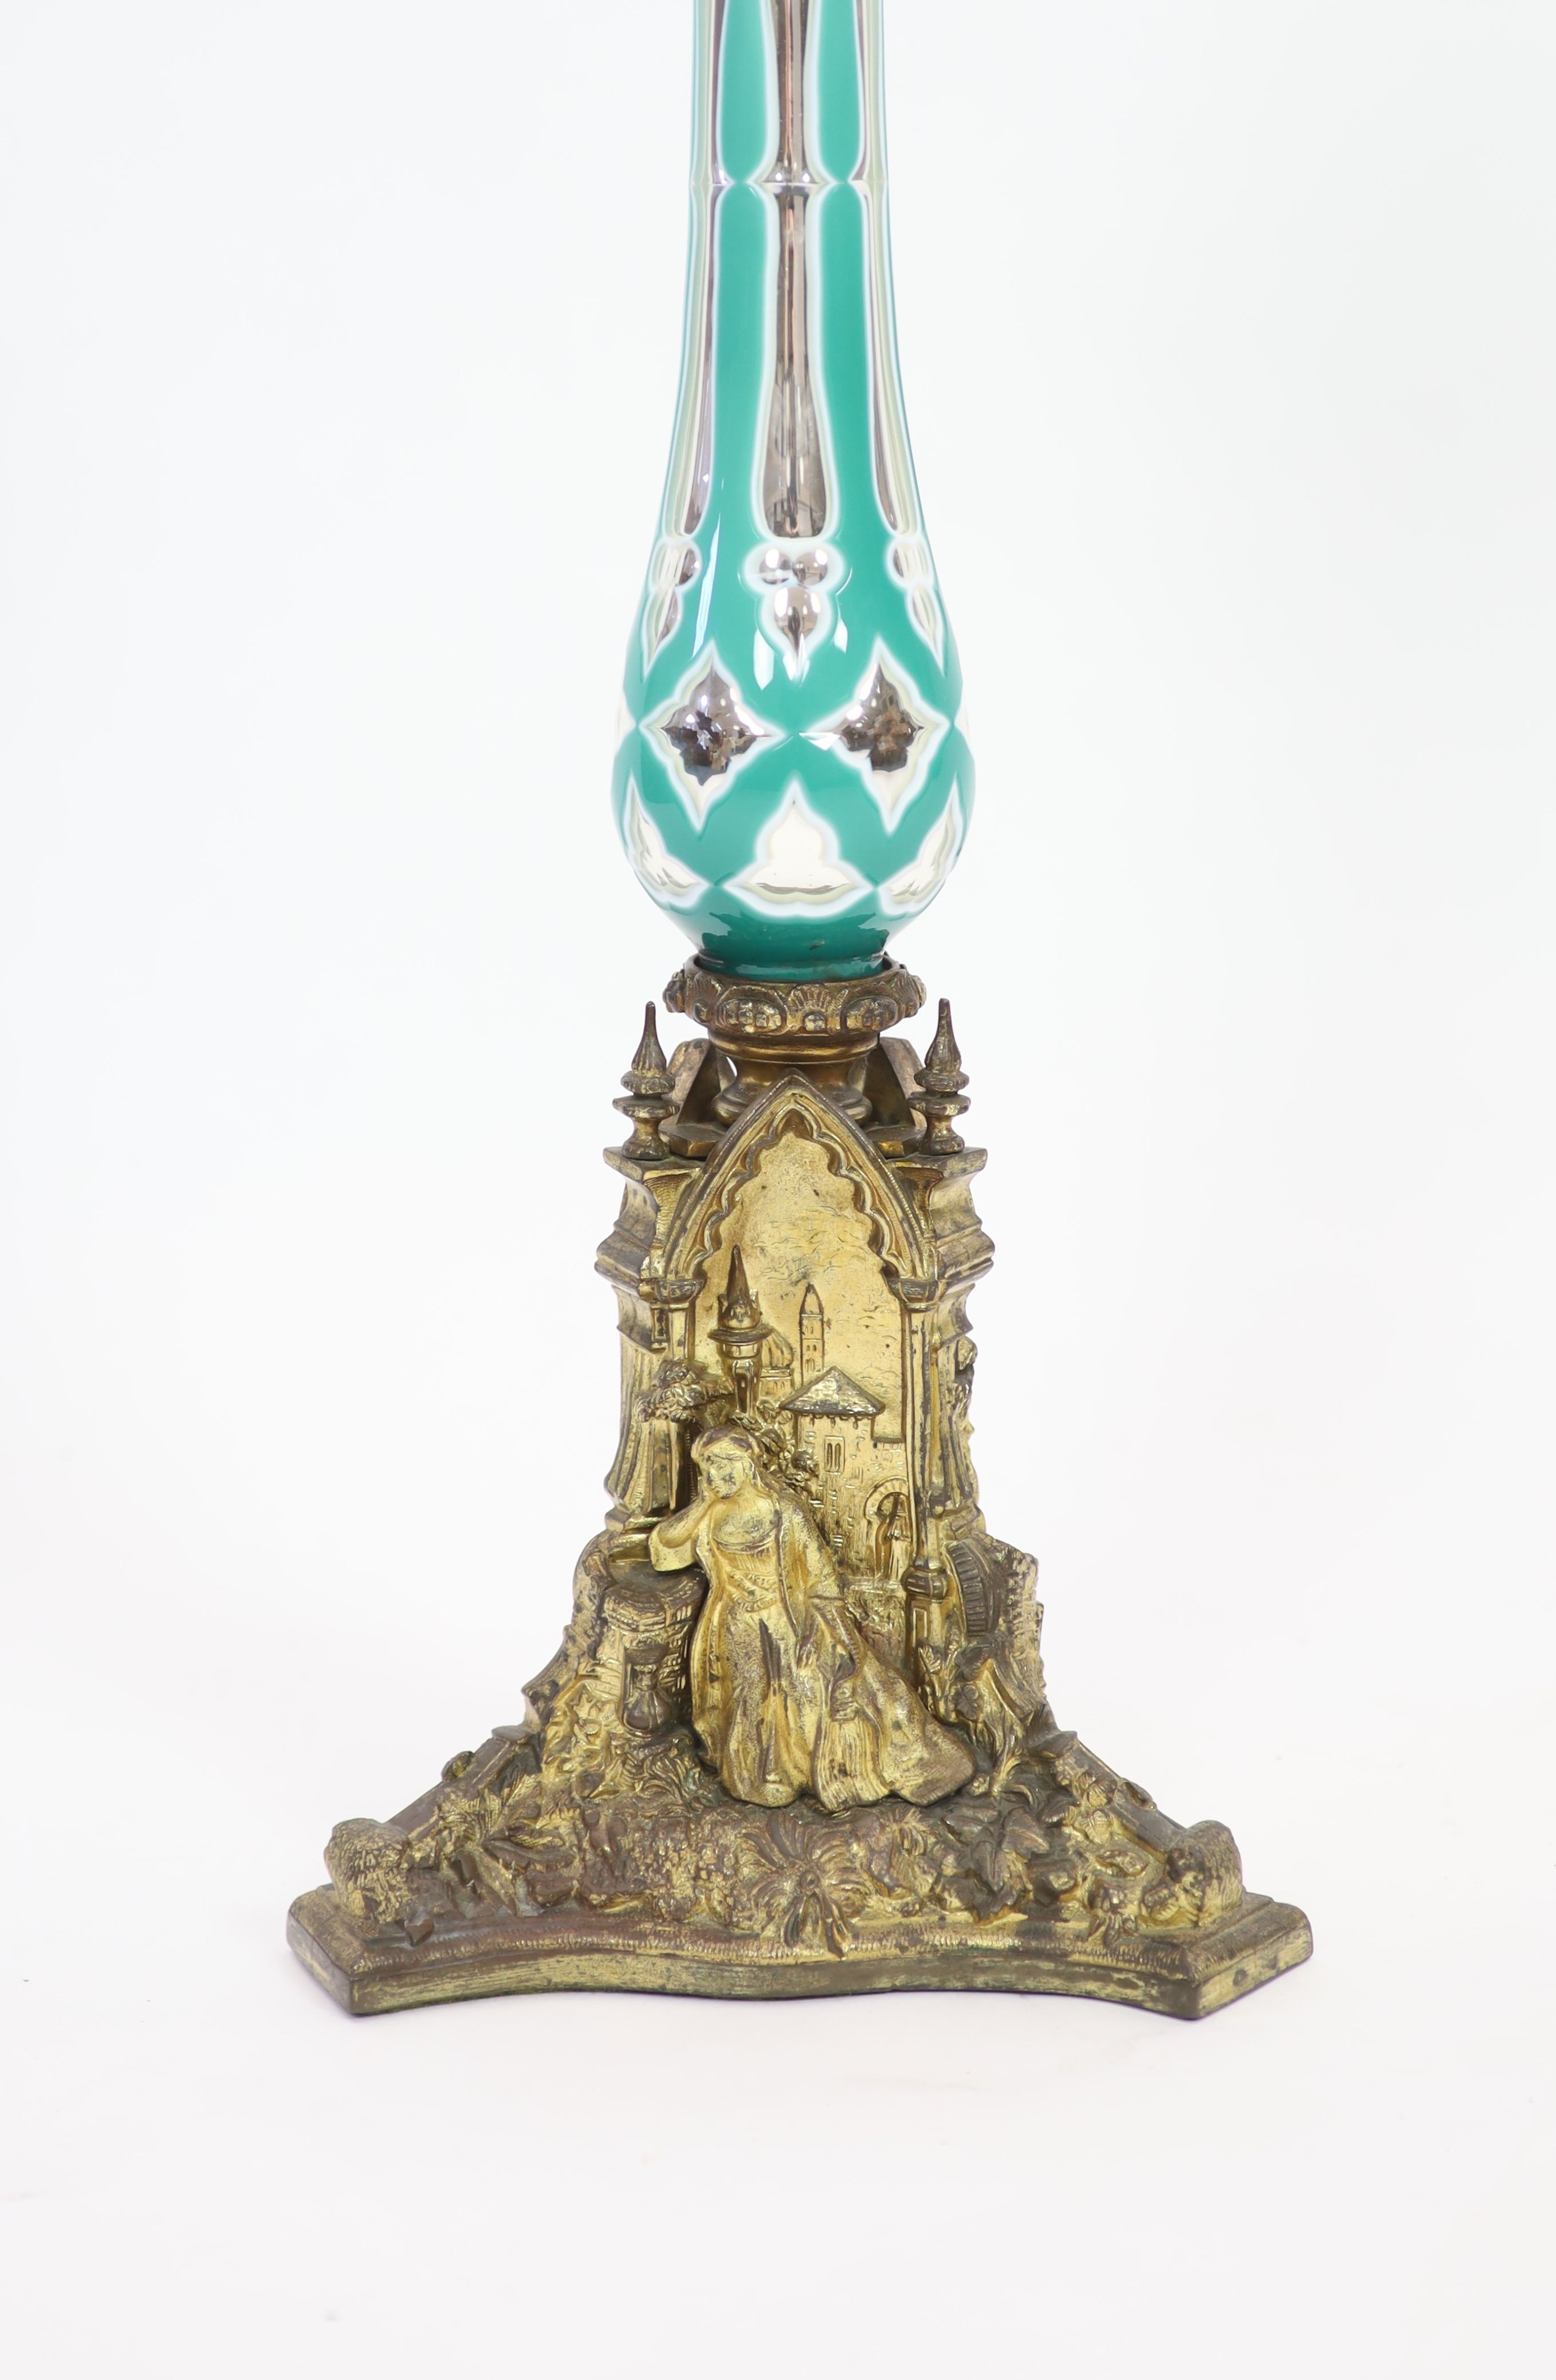 A rare ormolu mounted overlaid ‘mercury’ glass table lamp, the glass possibly by James Powell & Sons, mid 19th century, height 73cm